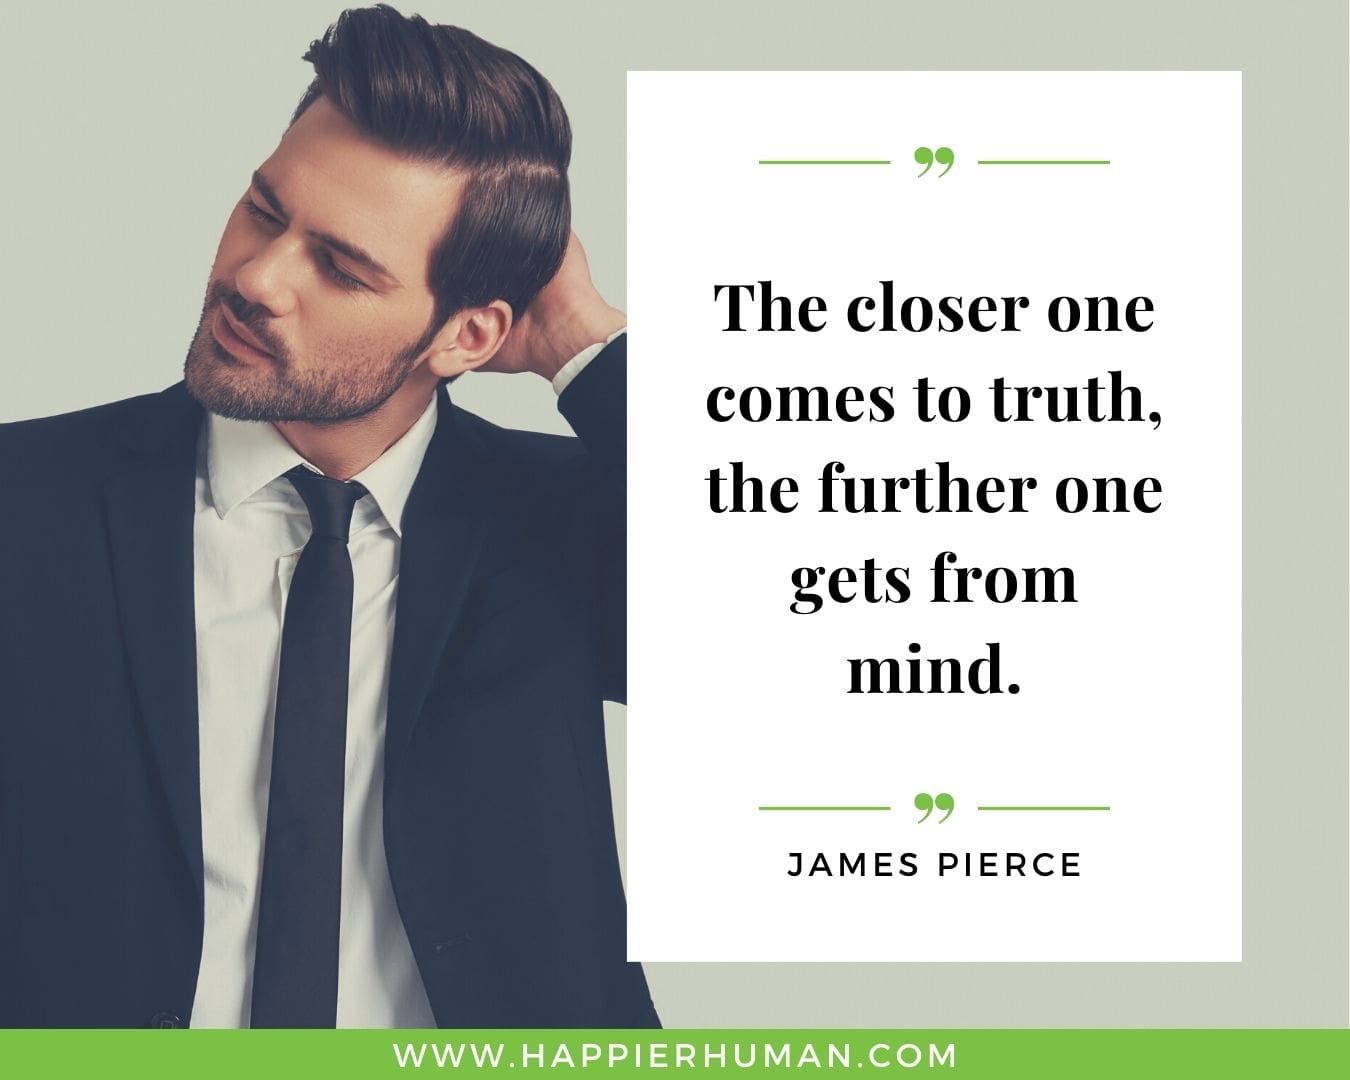 Overthinking Quotes - “The closer one comes to truth, the further one gets from mind." -James Pierce